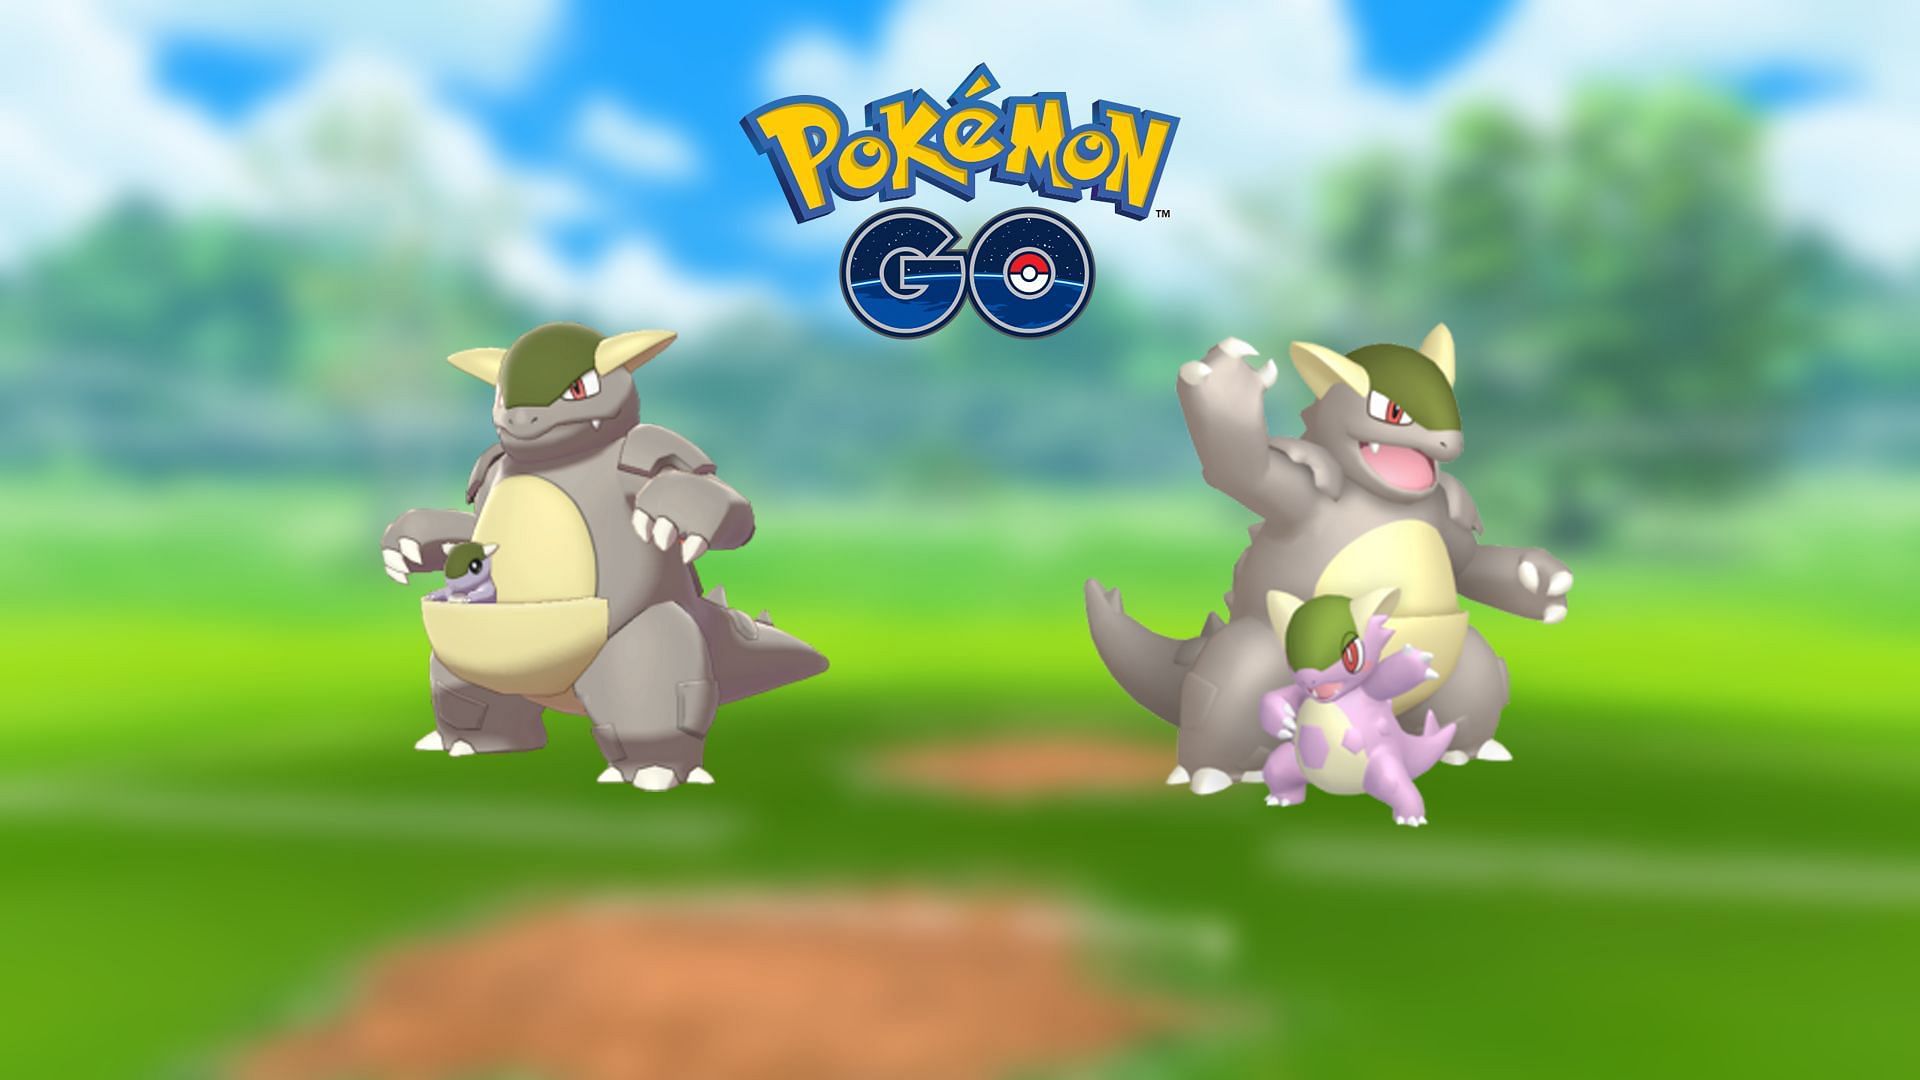 Can Kangaskhan be Shiny in Pokemon GO? - Answered - Prima Games